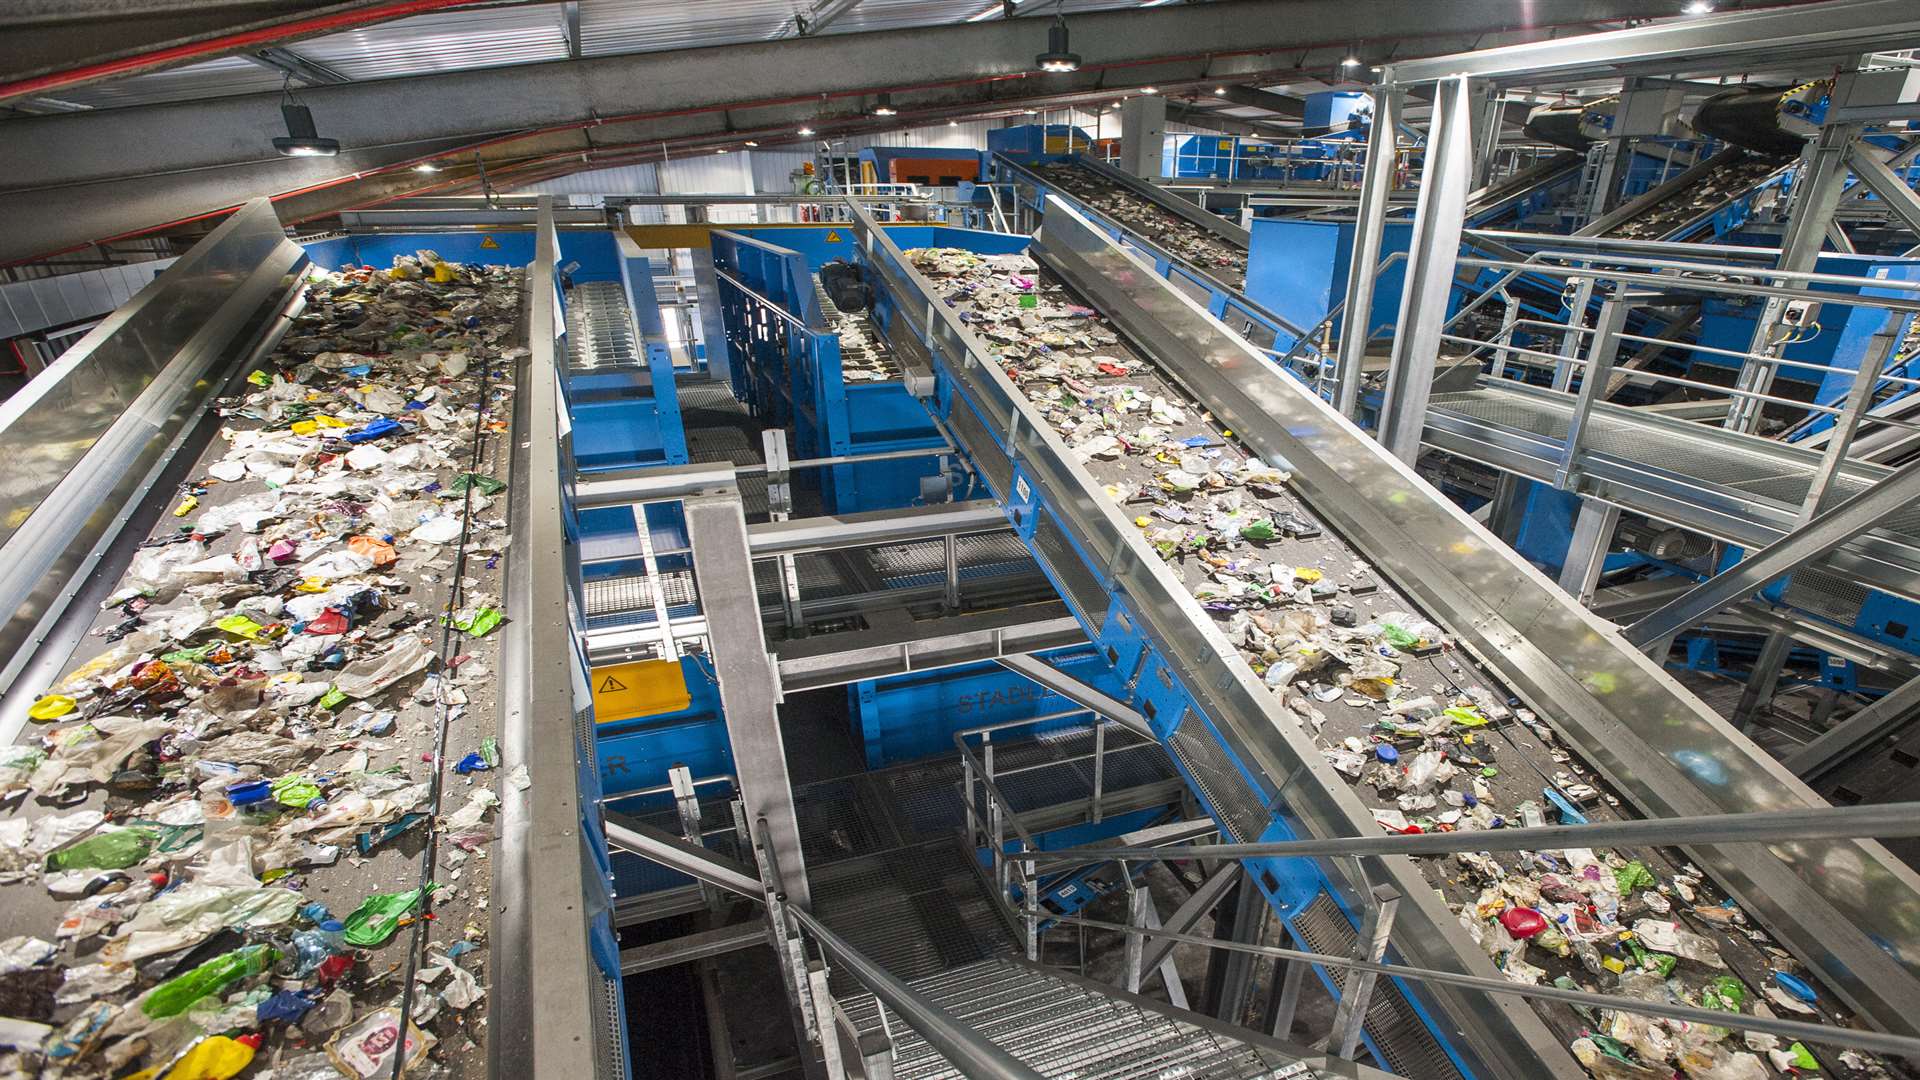 Inside the Materials Recycling Facility in Crayford. Picture courtesy of Maidstone Borough Council